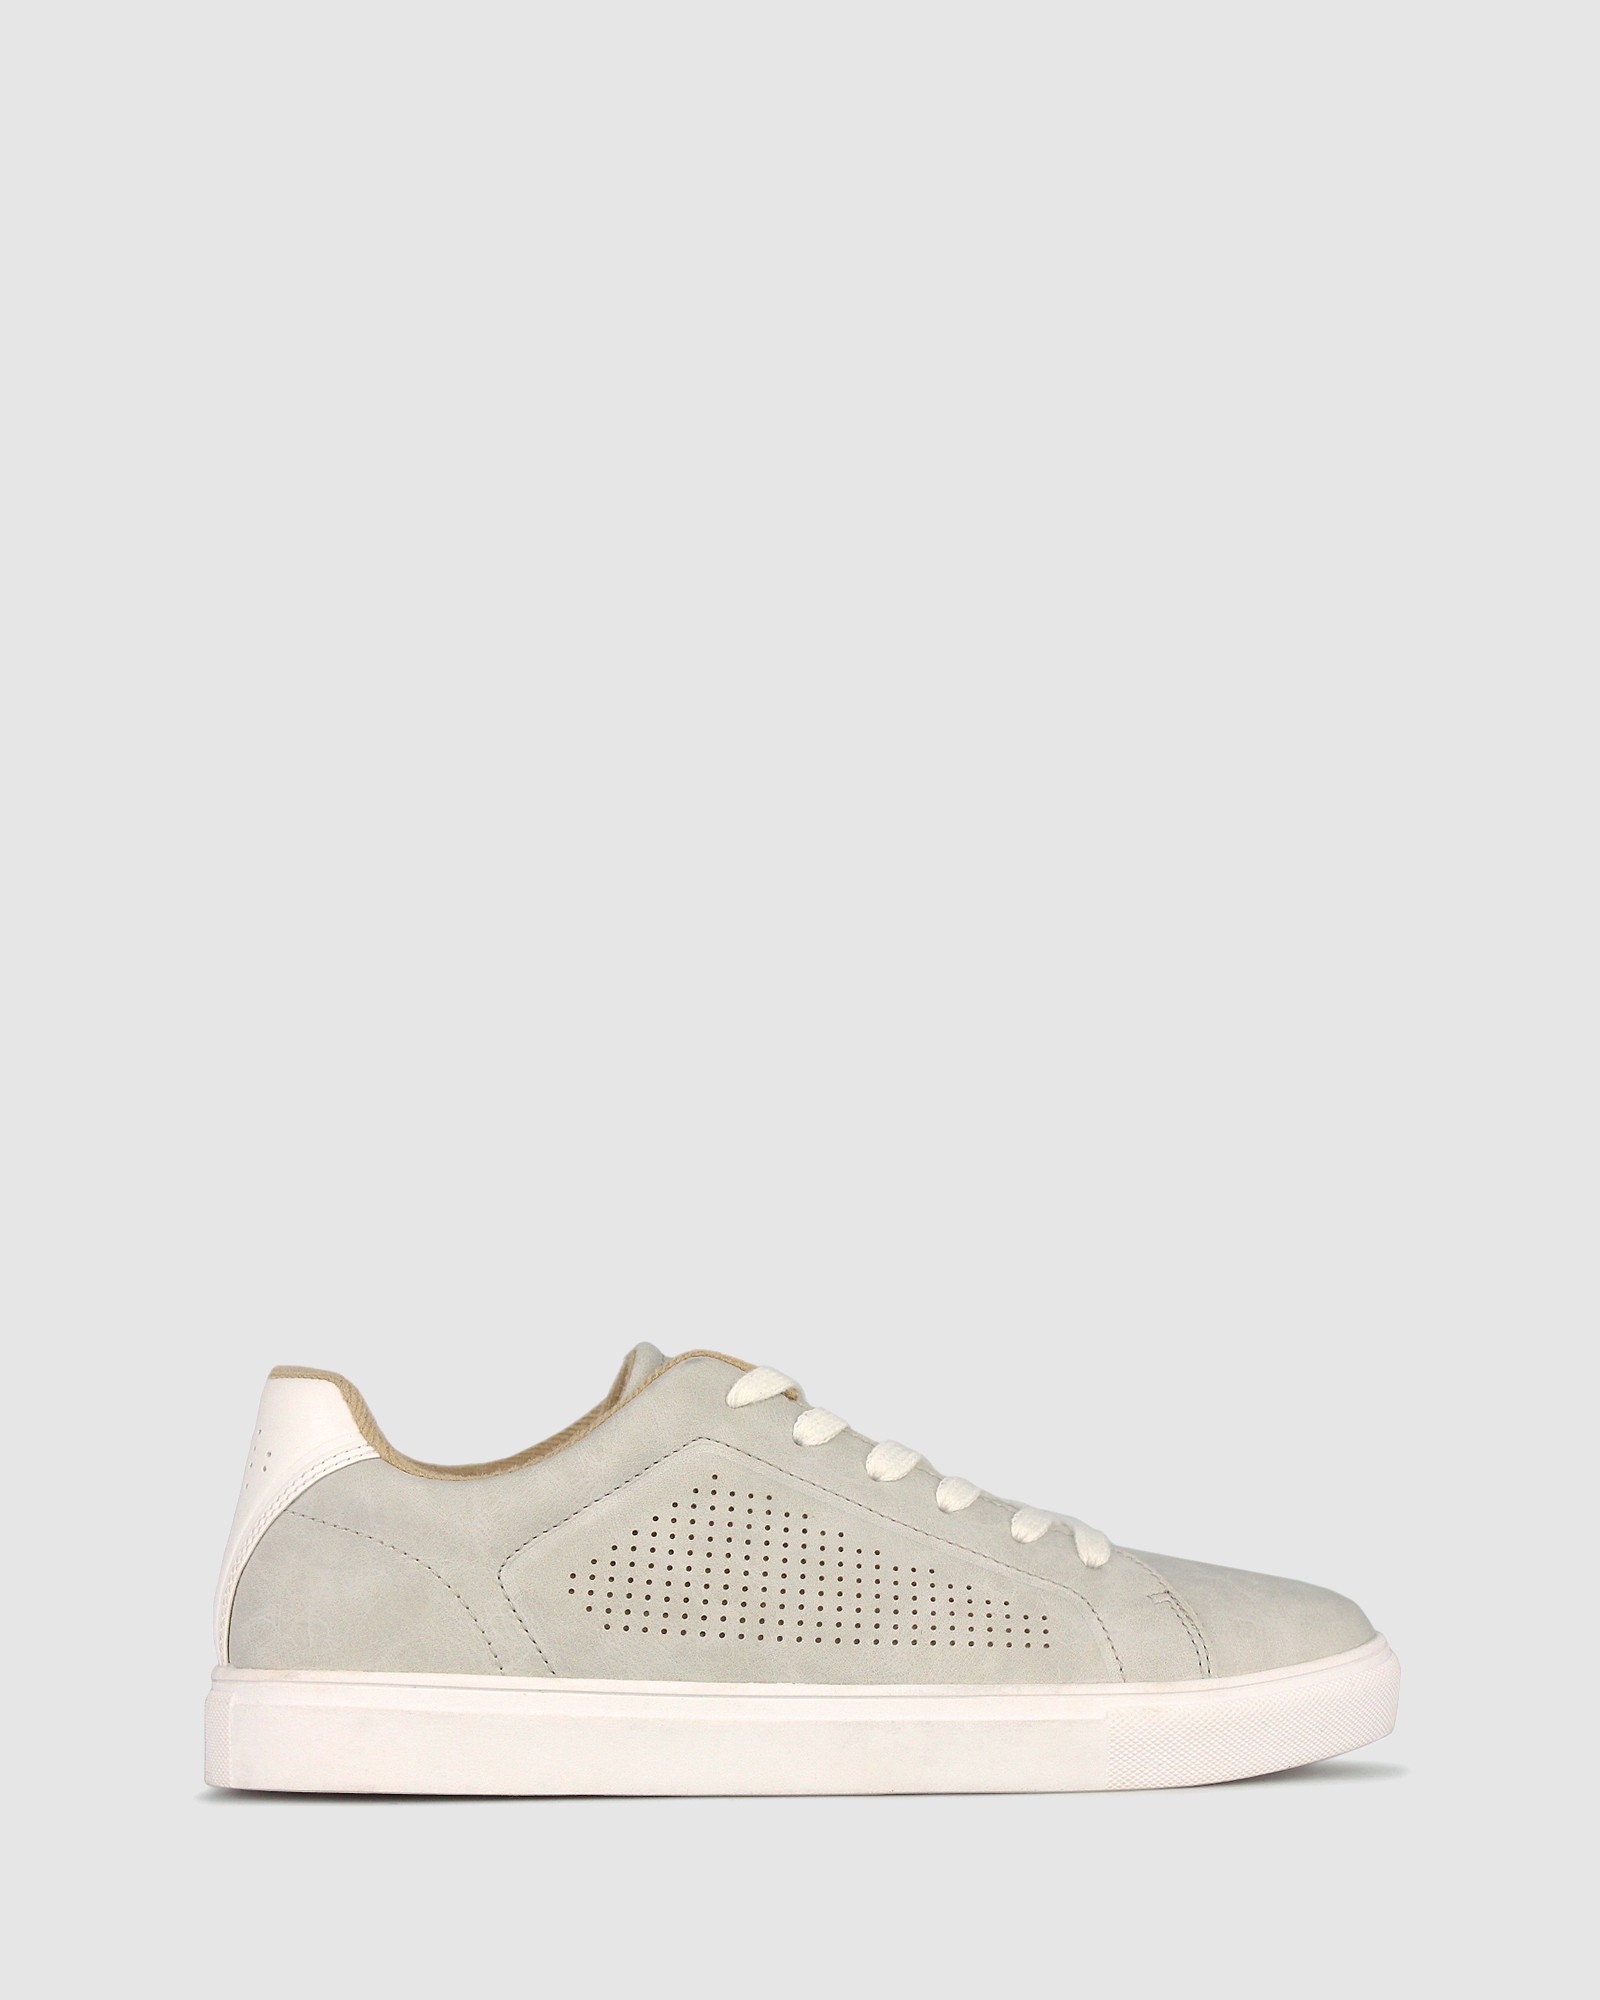 Charlie Lifestyle Sneakers Beige by Betts | ShoeSales